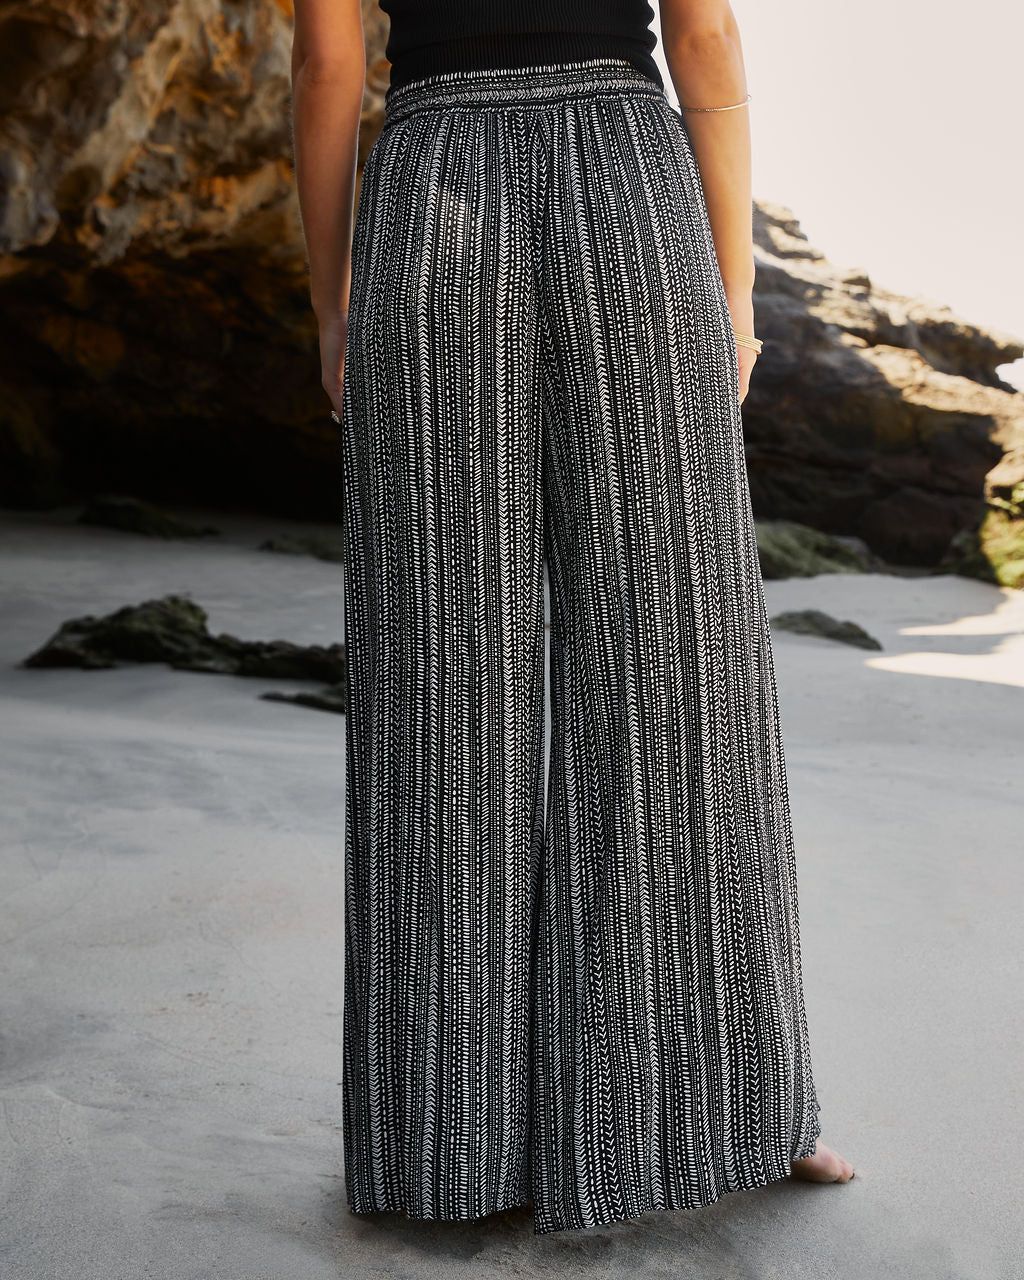 Summer Split Front Wide Legs Pants for Holiday